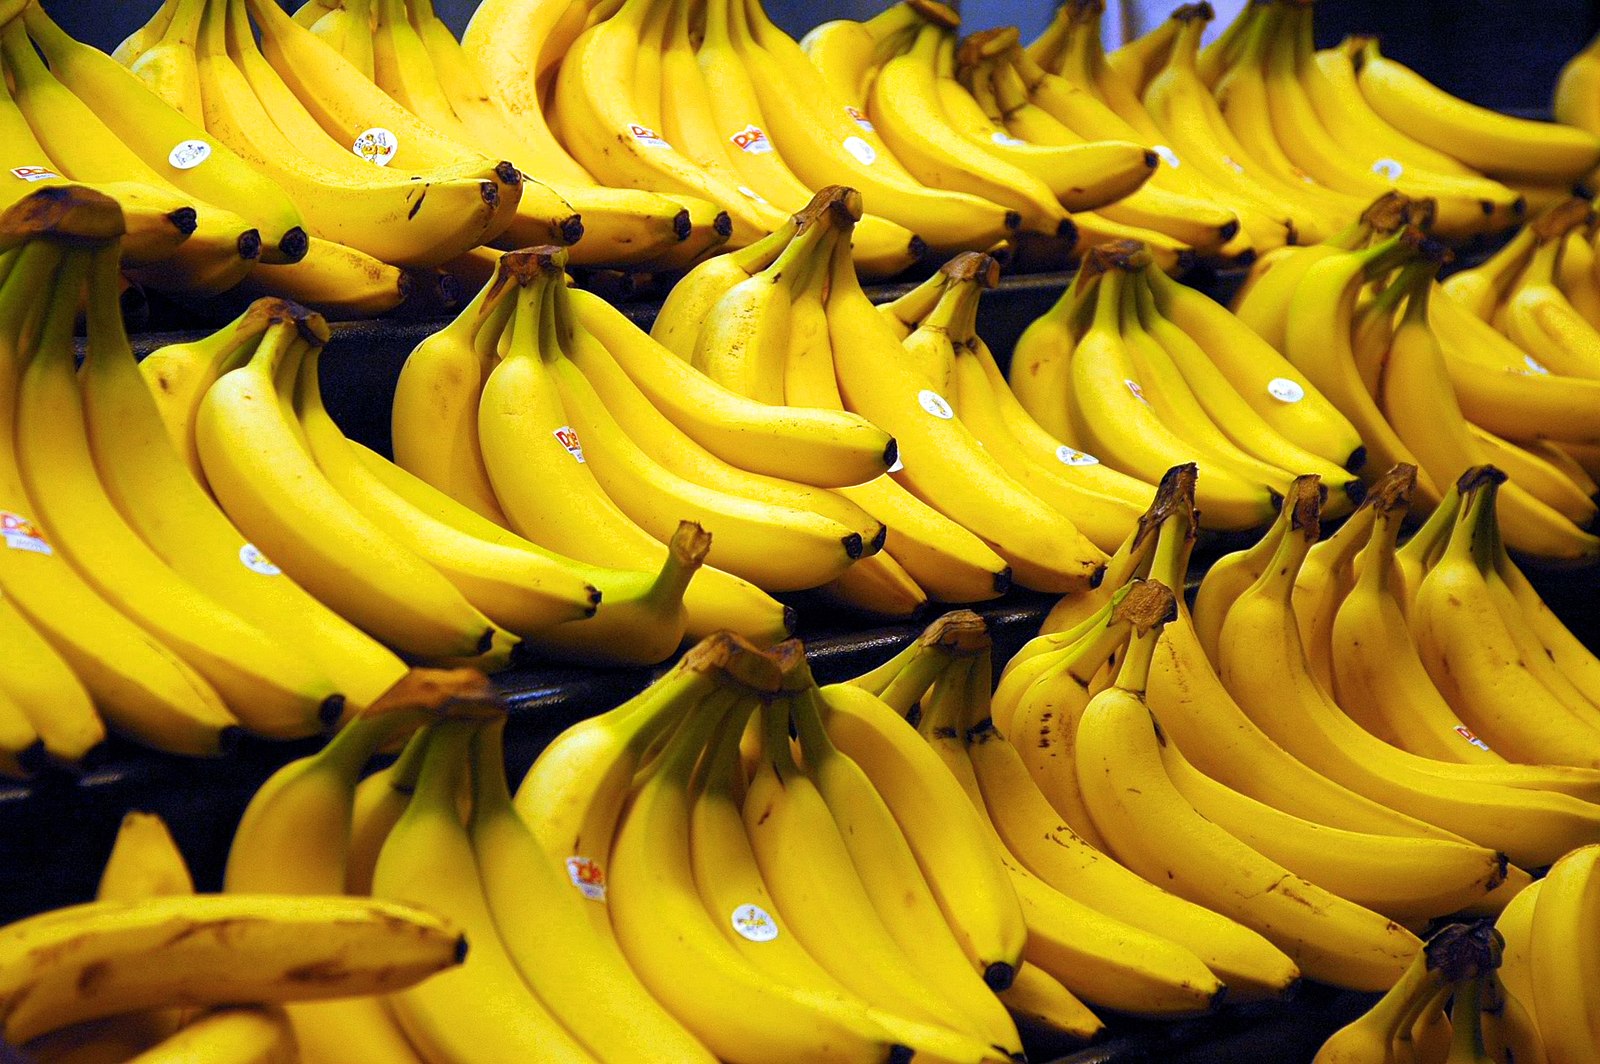 Bananas in the supermarket